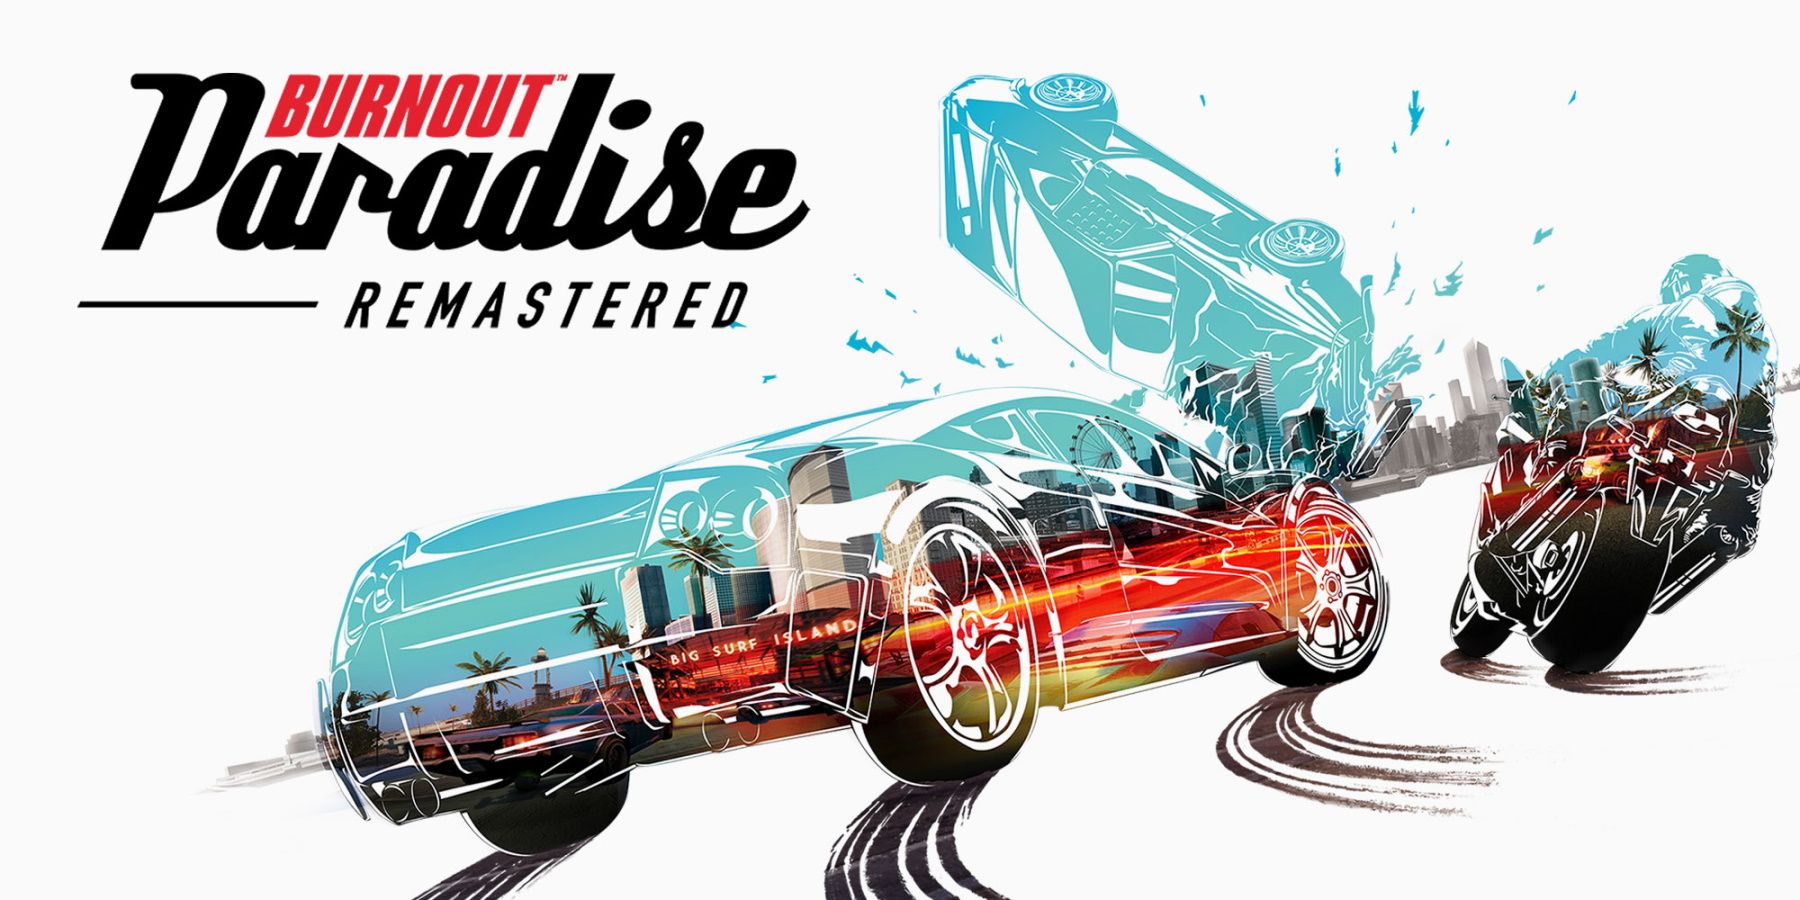 Criterion: 'We will make another Burnout game' - GameSpot